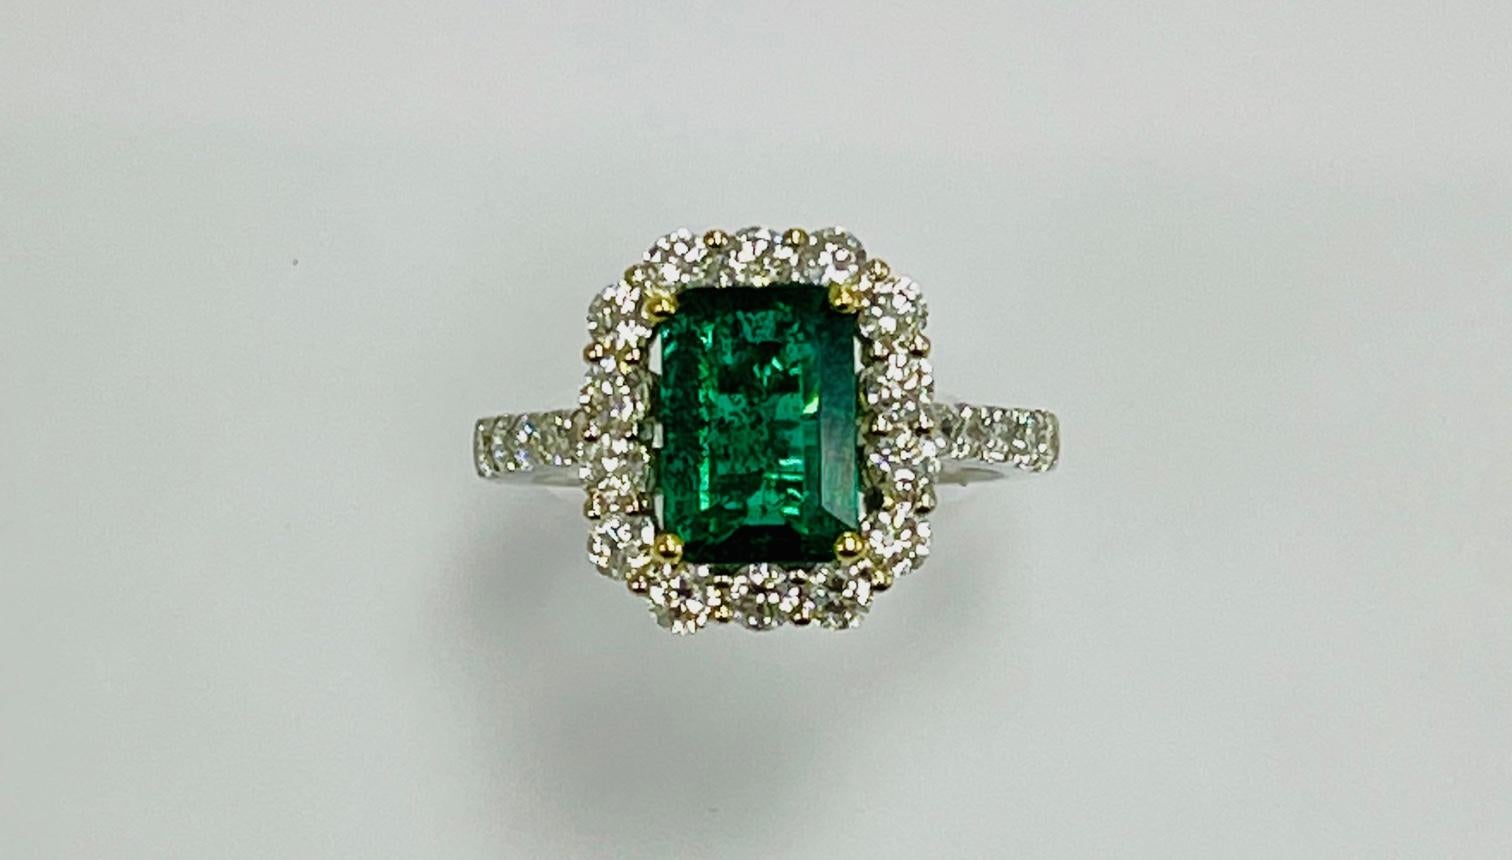 1.92 Carat Zambian emerald cut emerald set in 18k white gold ring 1.07 Carat diamants around it and hlaf way on the shank .